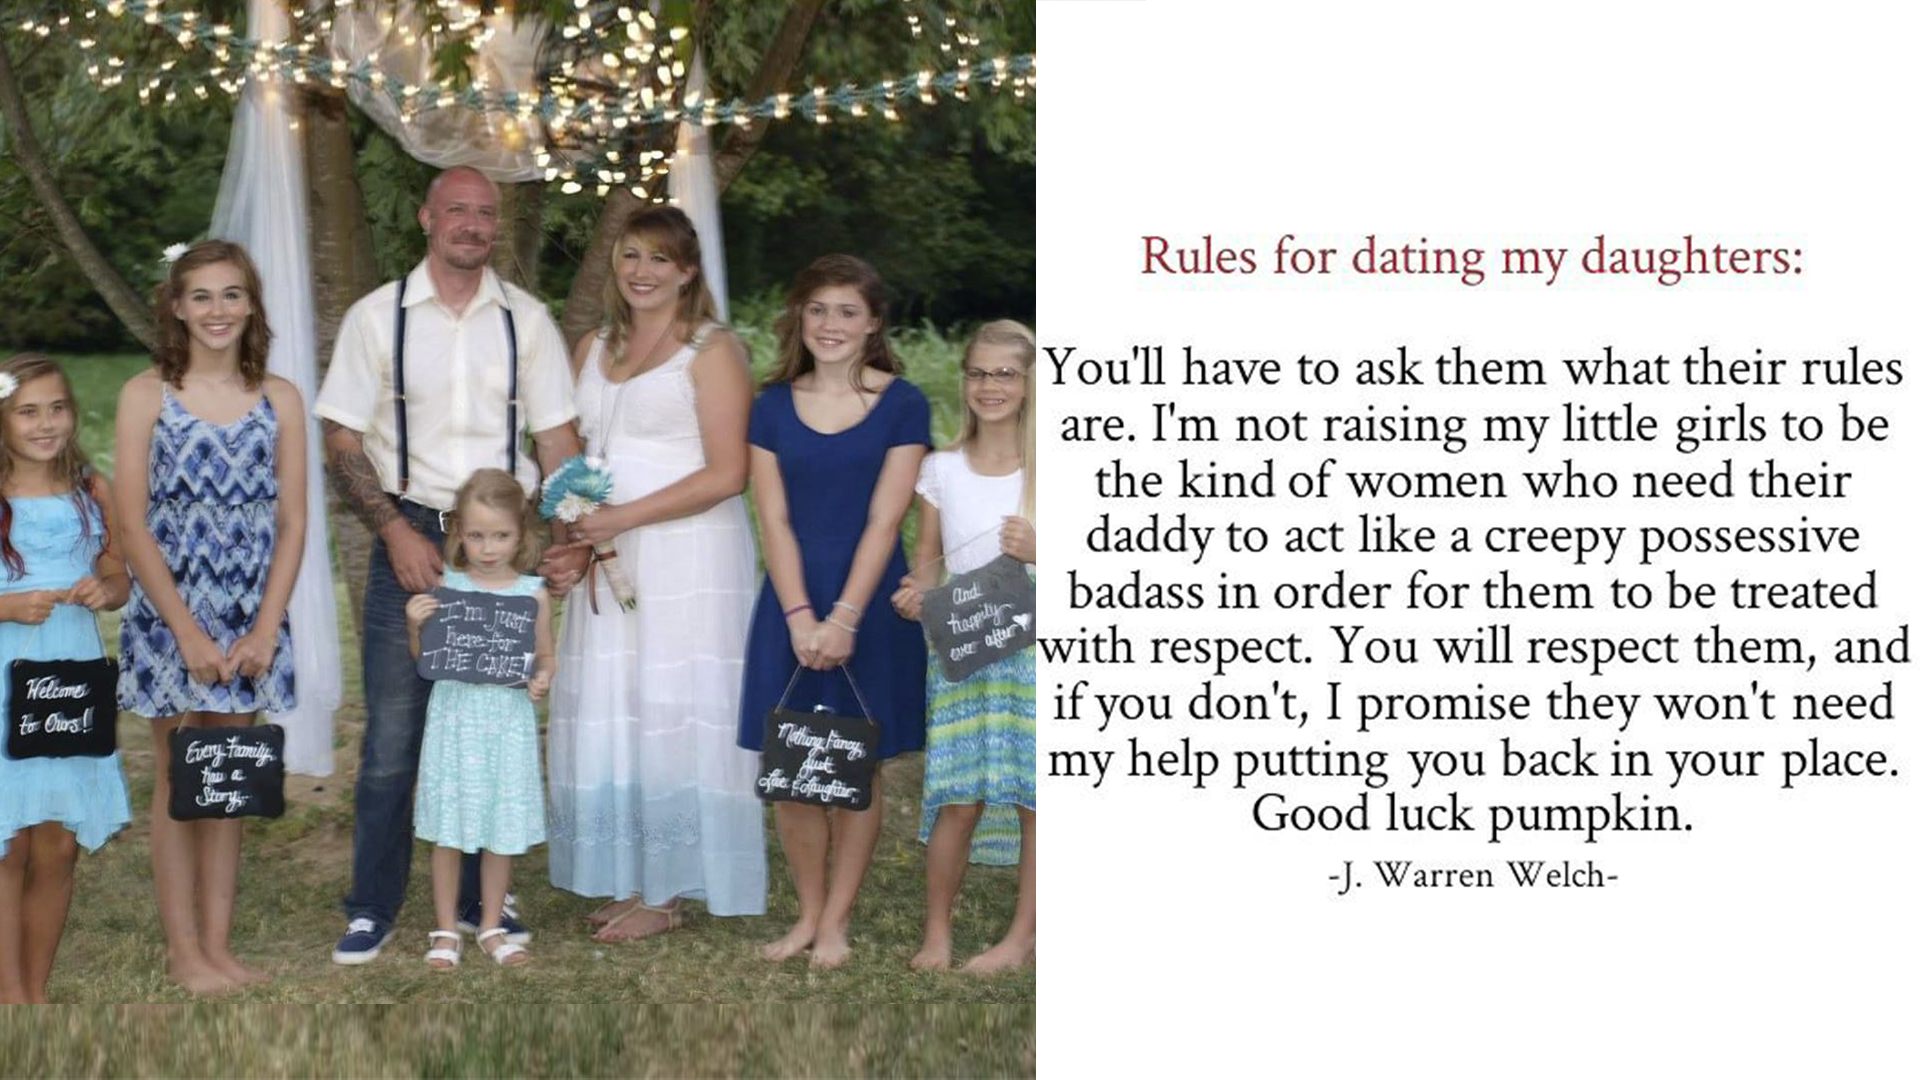 rules-for-dating-daughters-today-170906-tease_c89d7f41b6f72dfdf901e49329641192